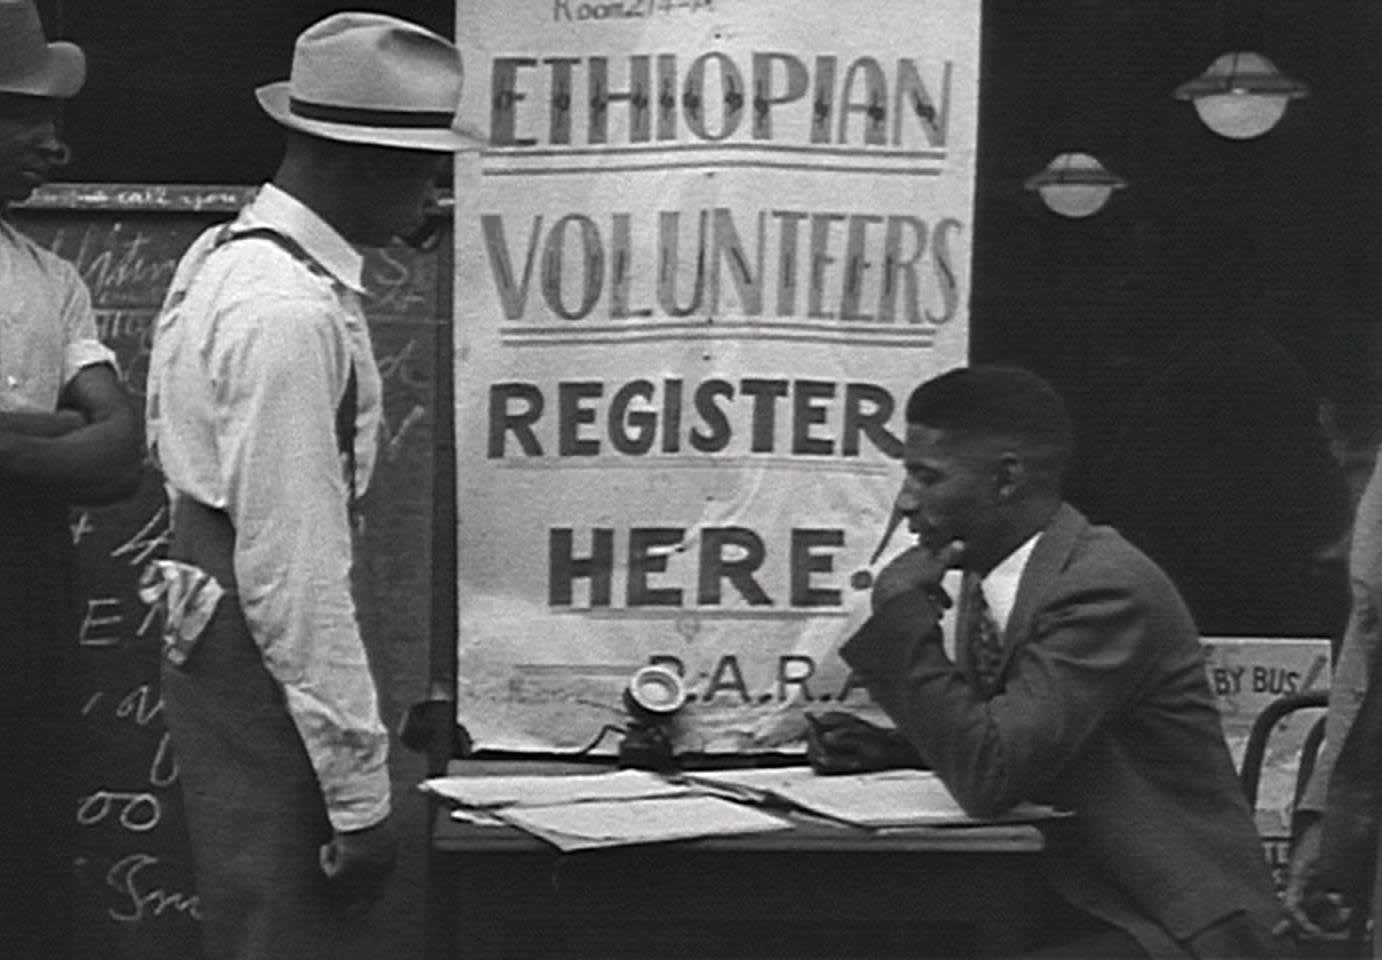 African Americans lined up to volunteer in the Ethiopian military. New York City, 1935